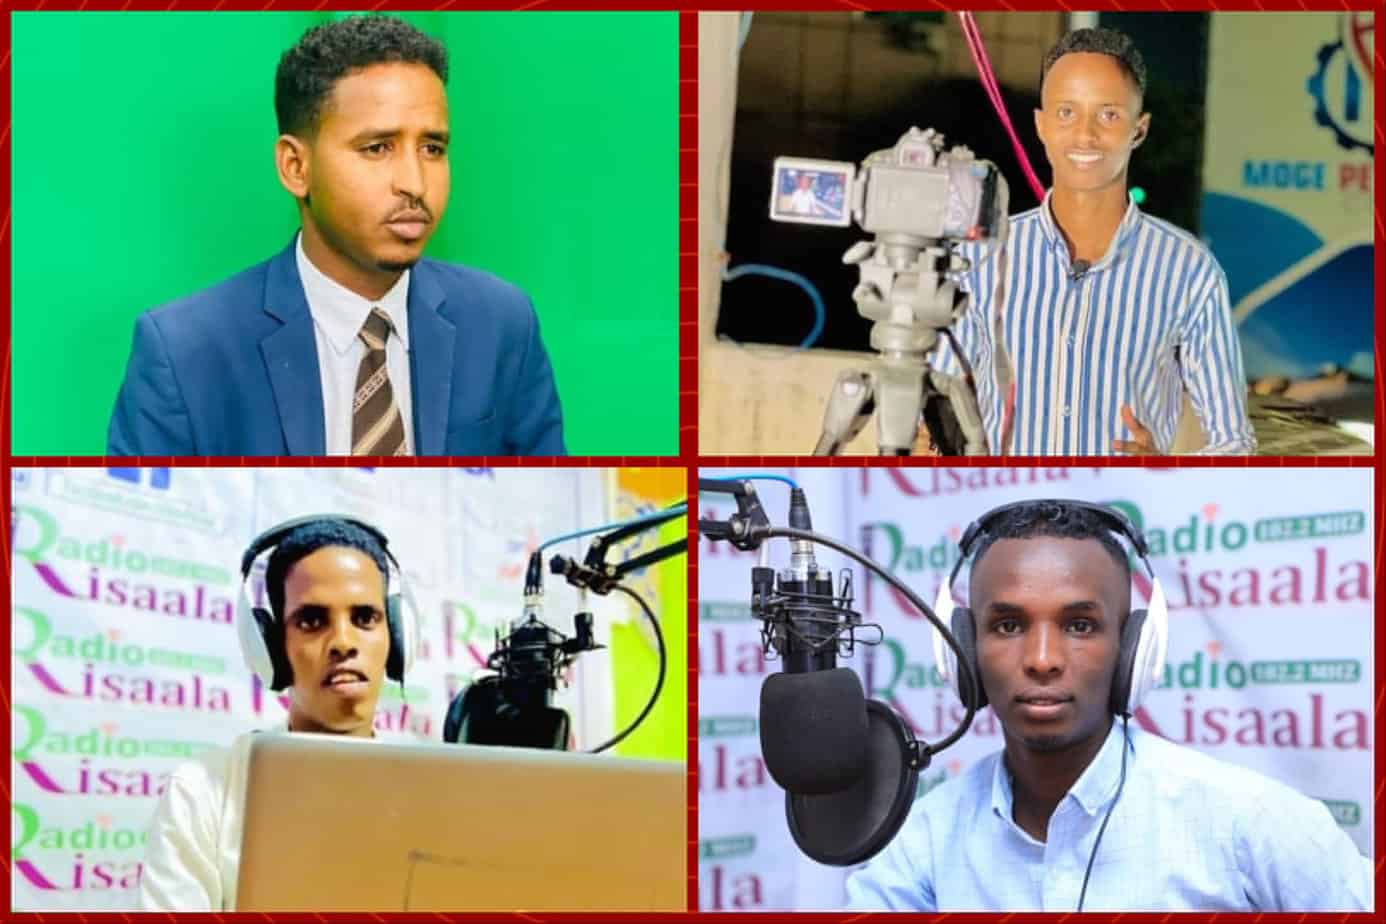 Attacks and threats against journalists and media stations in Somalia continue with impunity